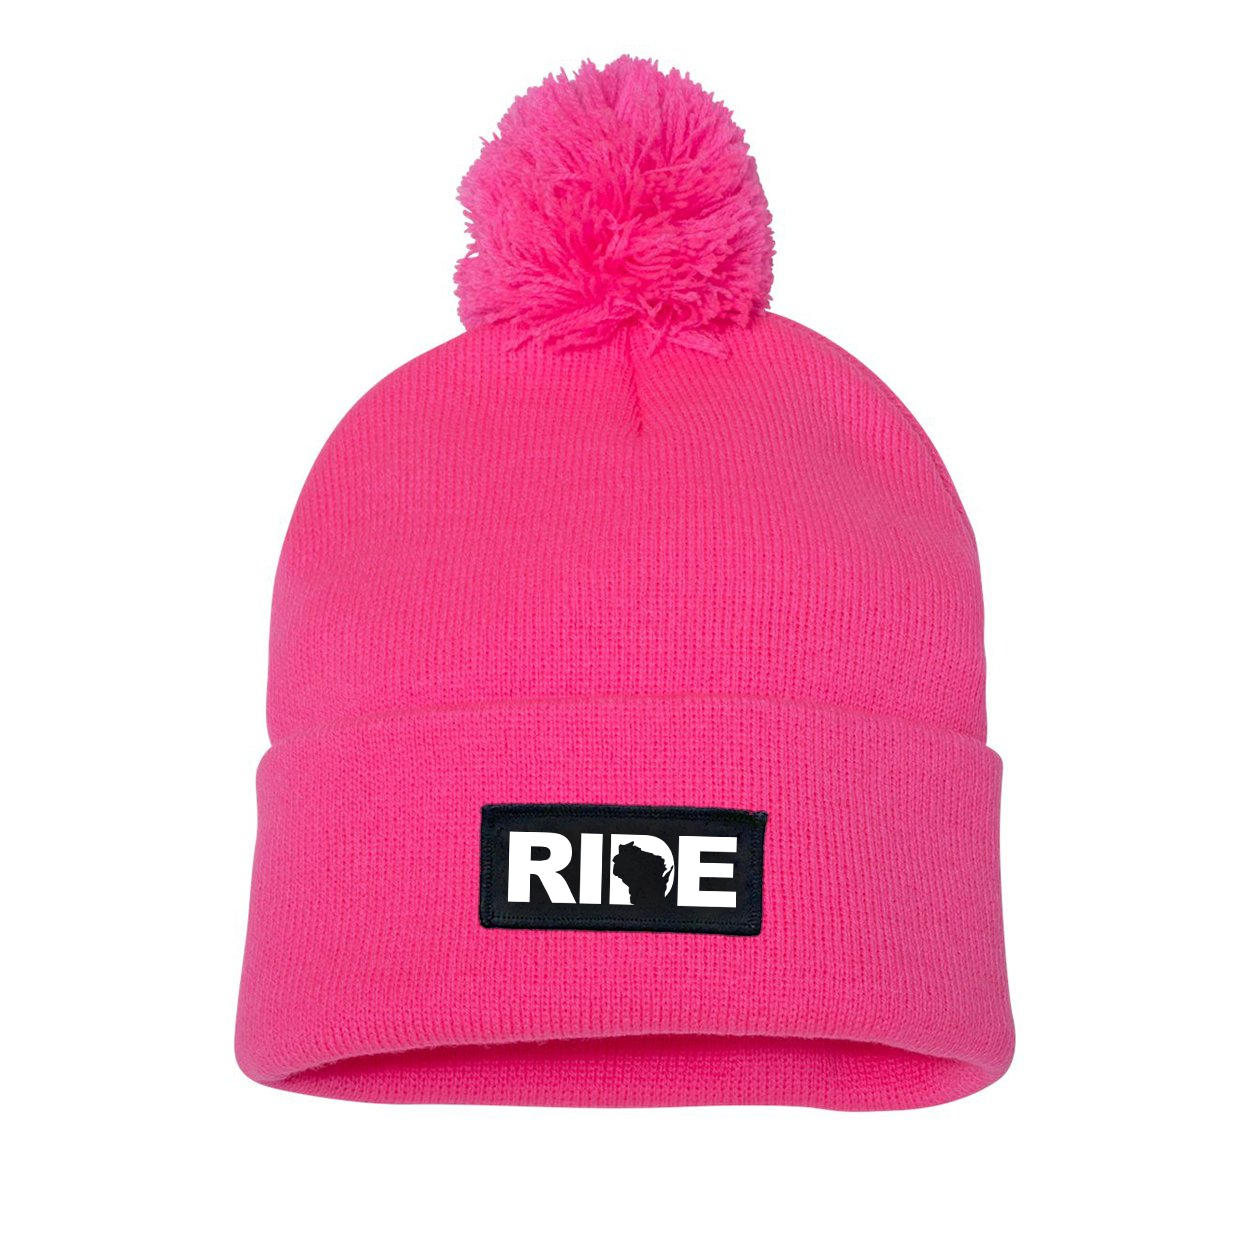 Ride Wisconsin Night Out Woven Patch Roll Up Pom Knit Beanie Pink (White Logo)